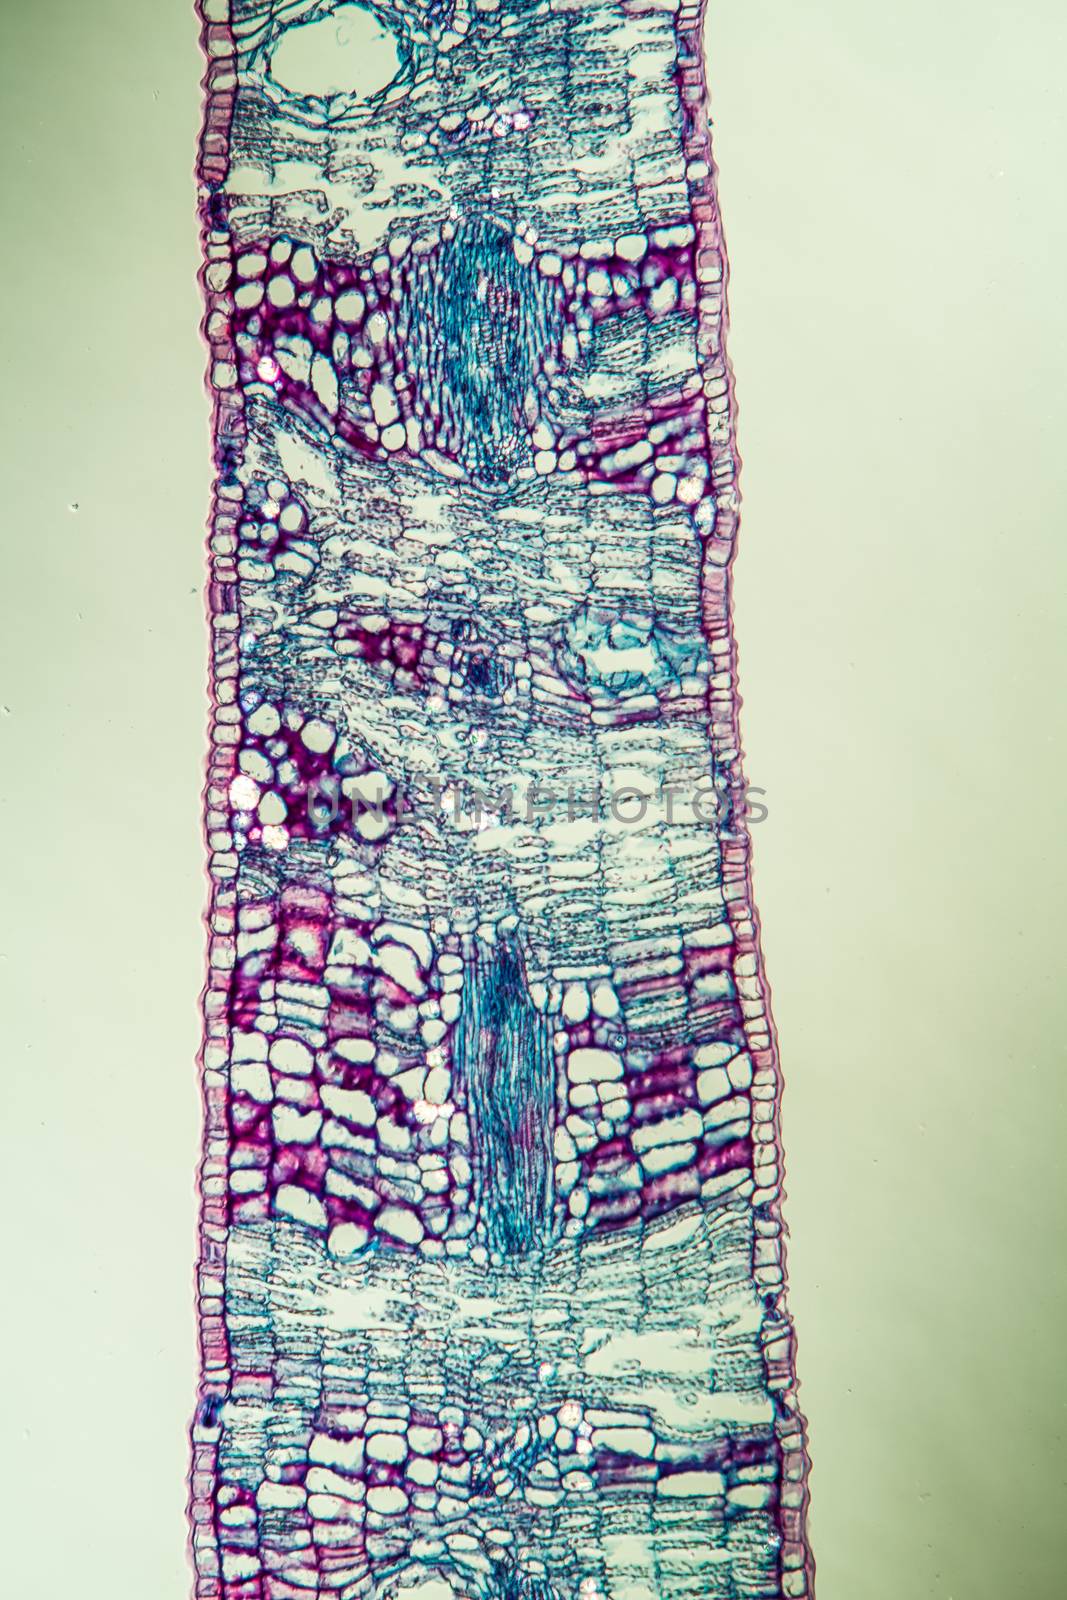 Eucalyptus cross section through leaf 100x by Dr-Lange